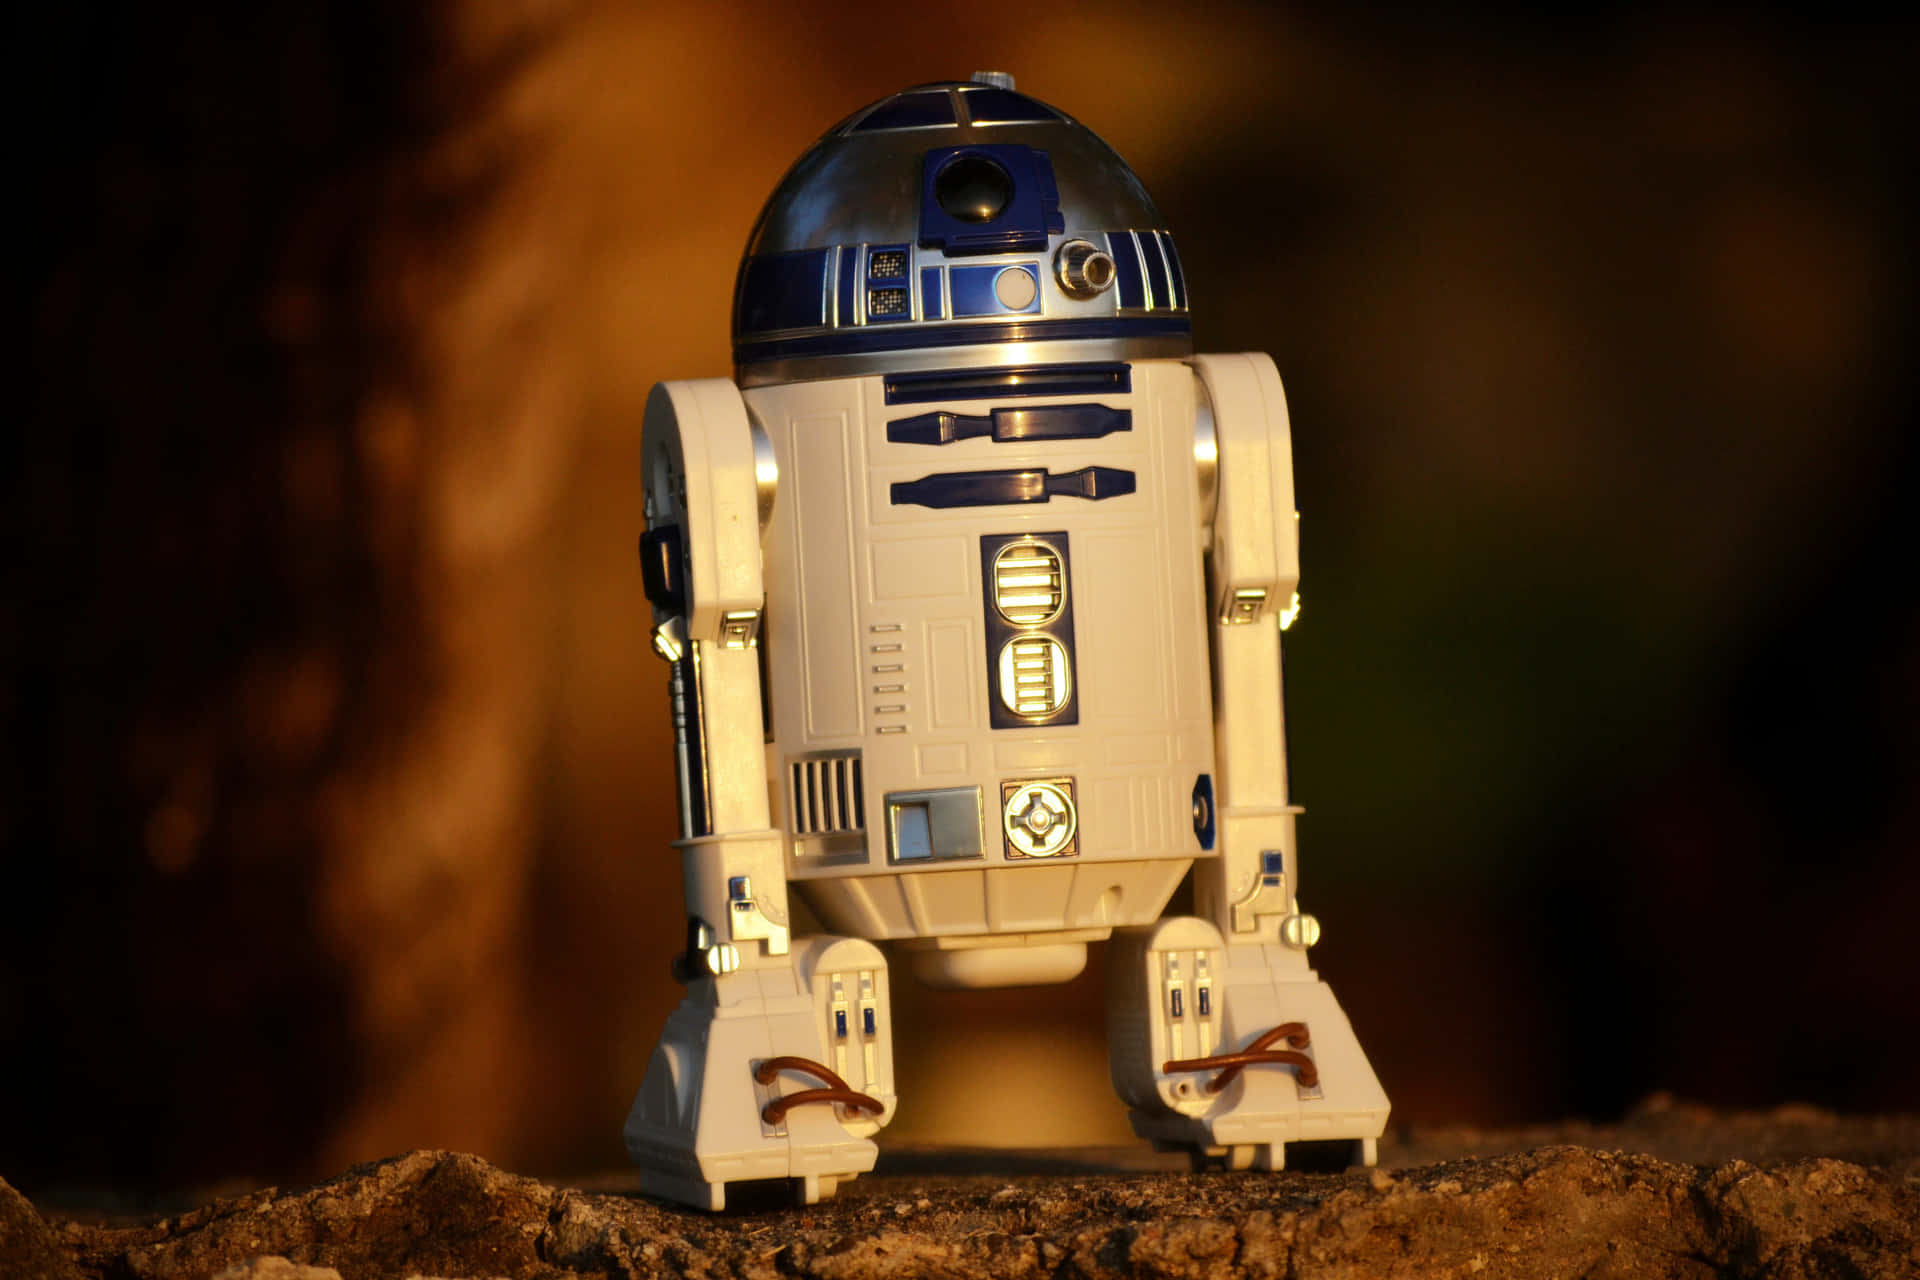 The Iconic Star Wars Character, R2d2